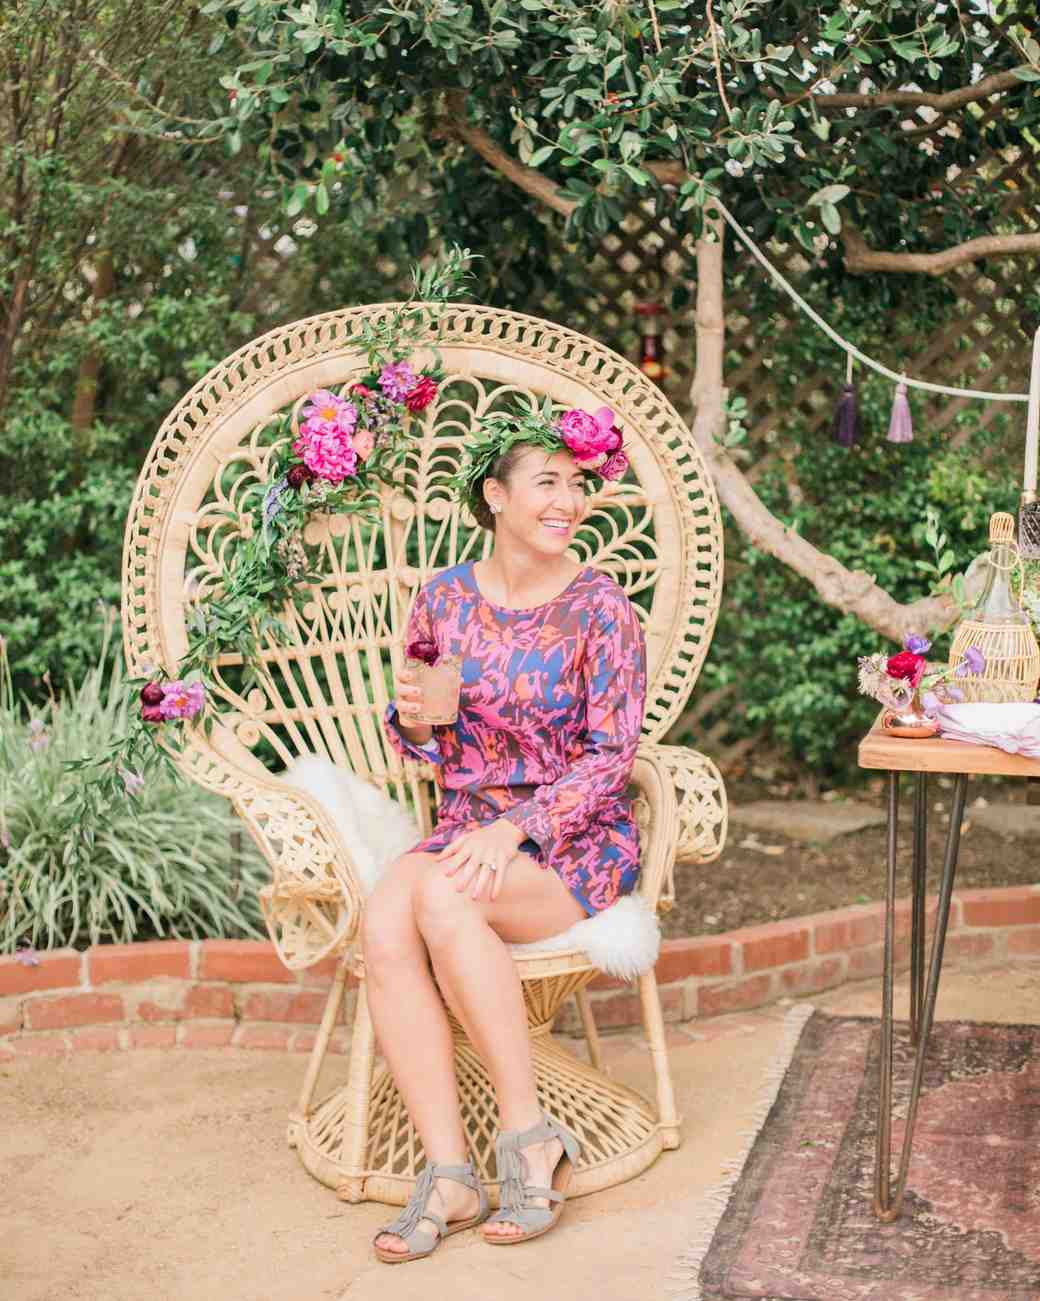 Bohemian Bachelorette Party Ideas
 You ll Want to Pin Every Detail of This Boho Chic